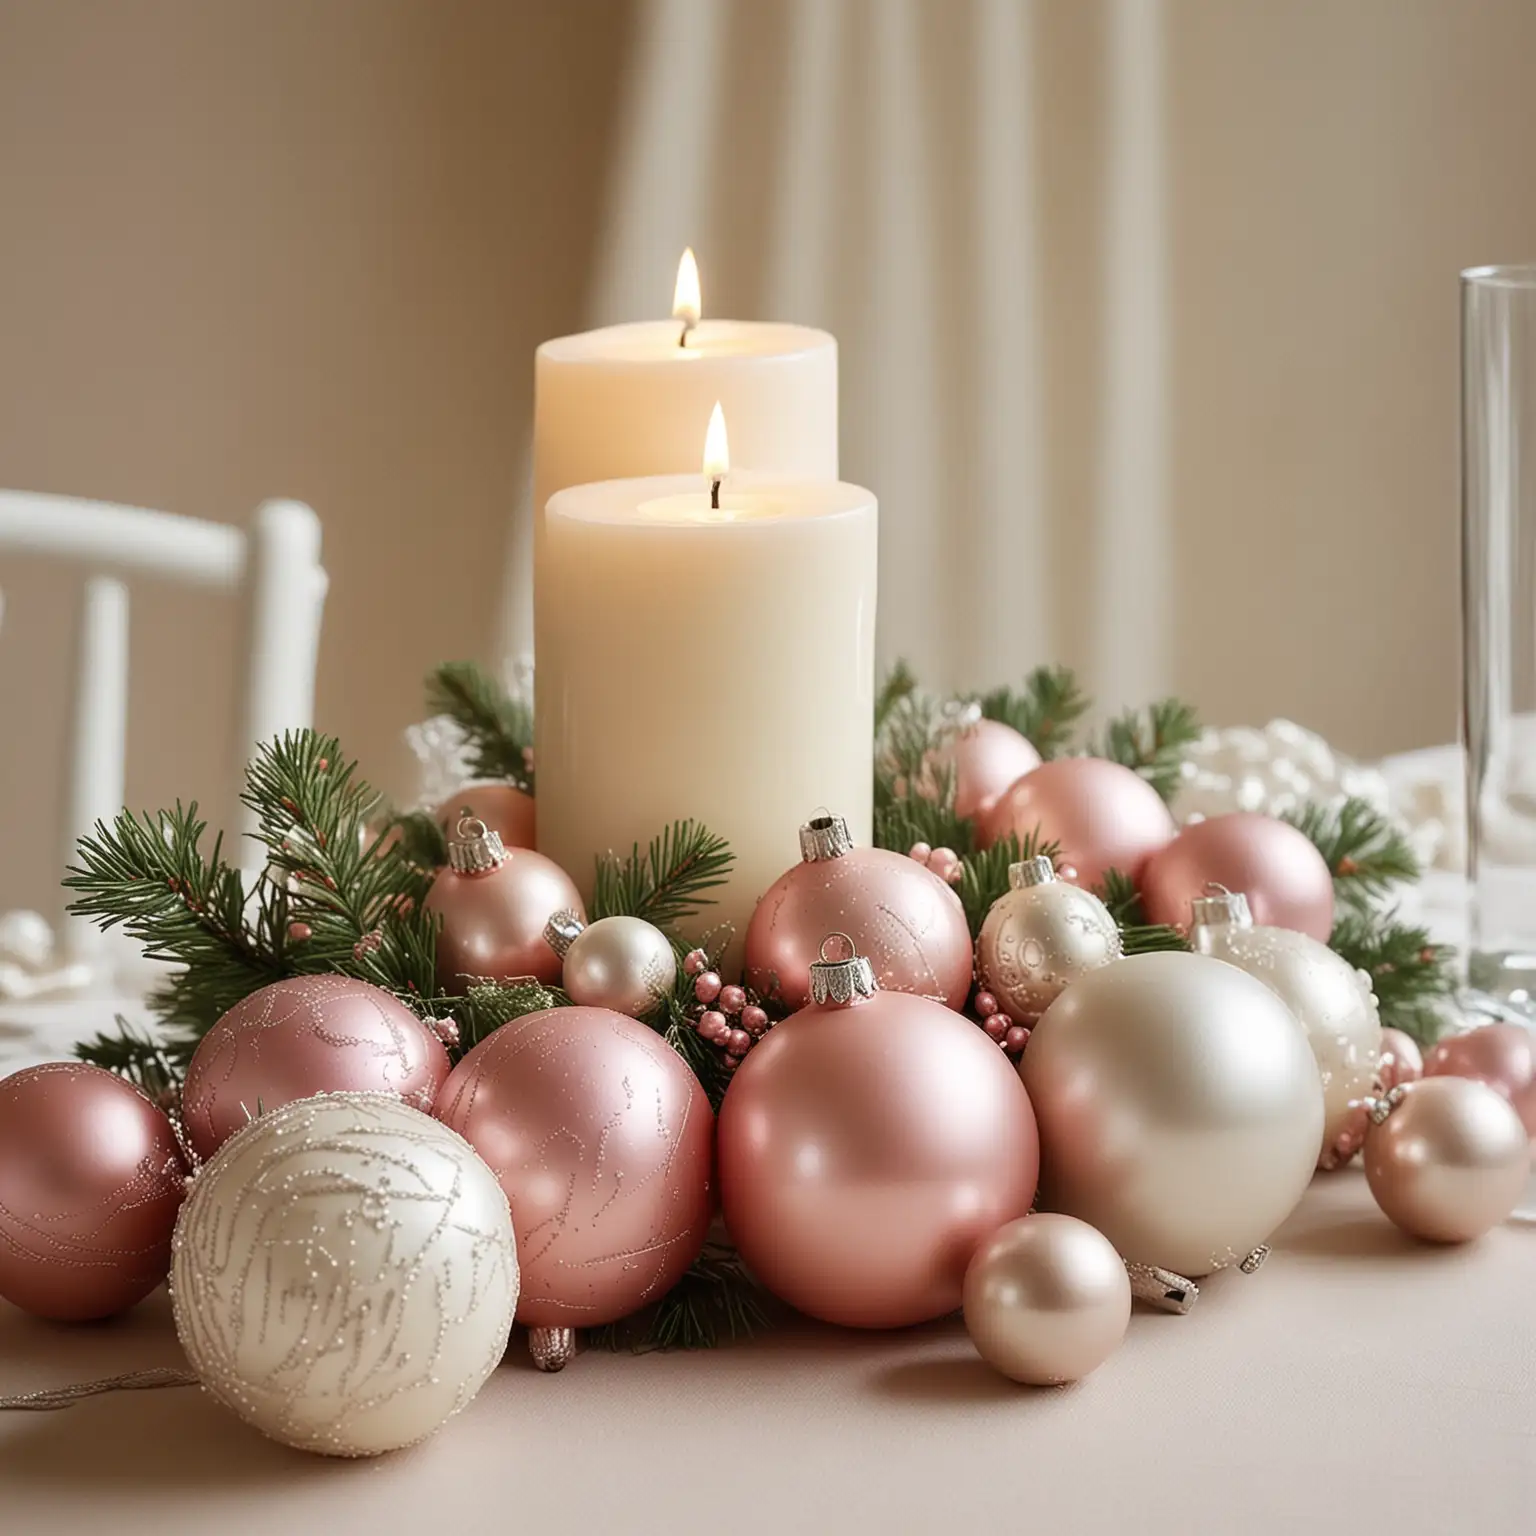 Elegant-Winter-Wedding-Centerpiece-with-Cream-and-Blush-Pink-Ornaments